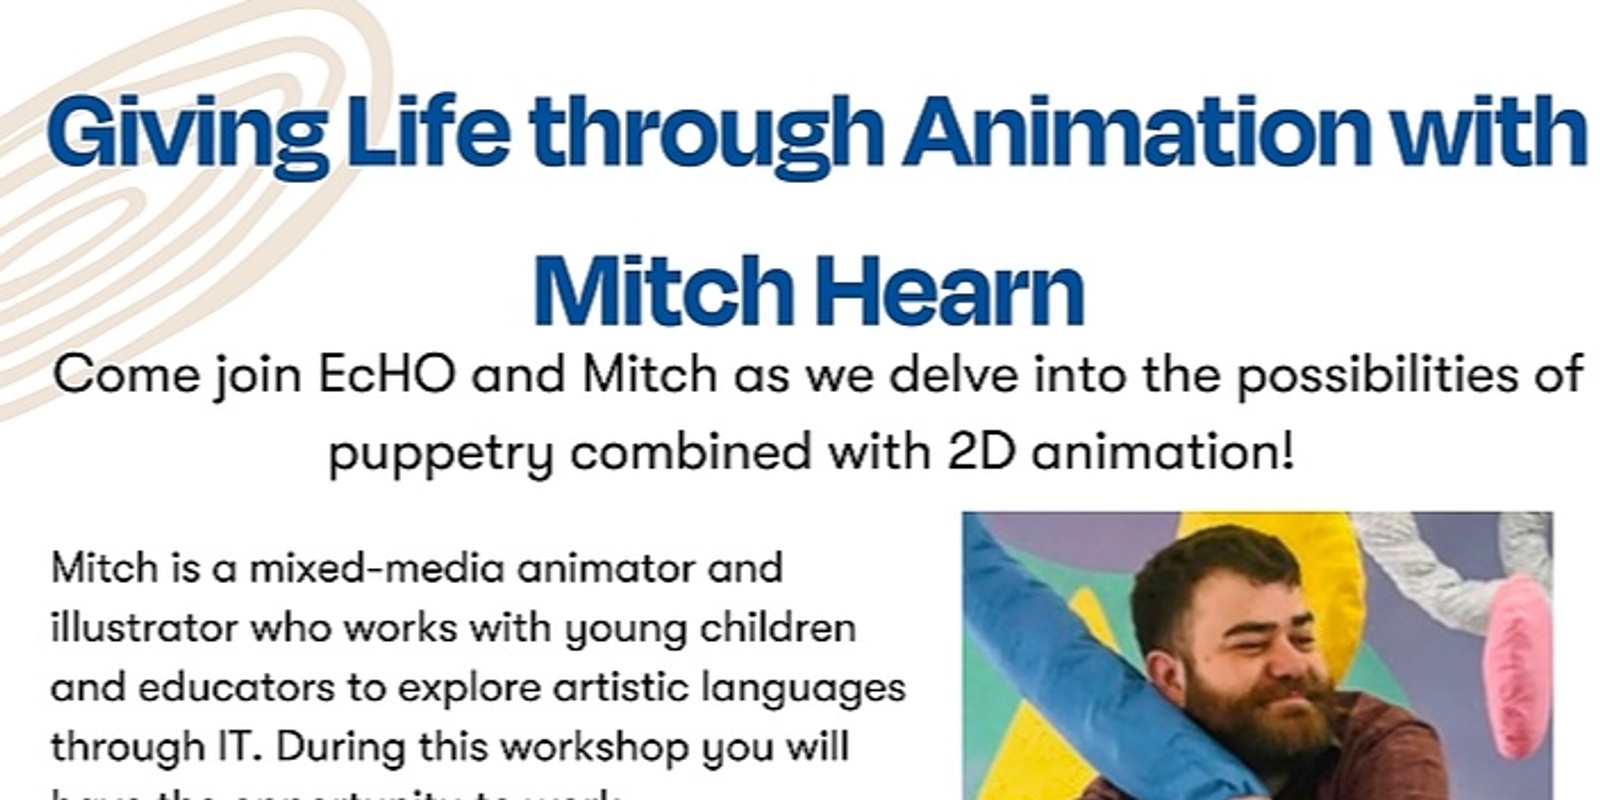 Banner image for Twilight: Giving life through animation with Mitch Hearn 